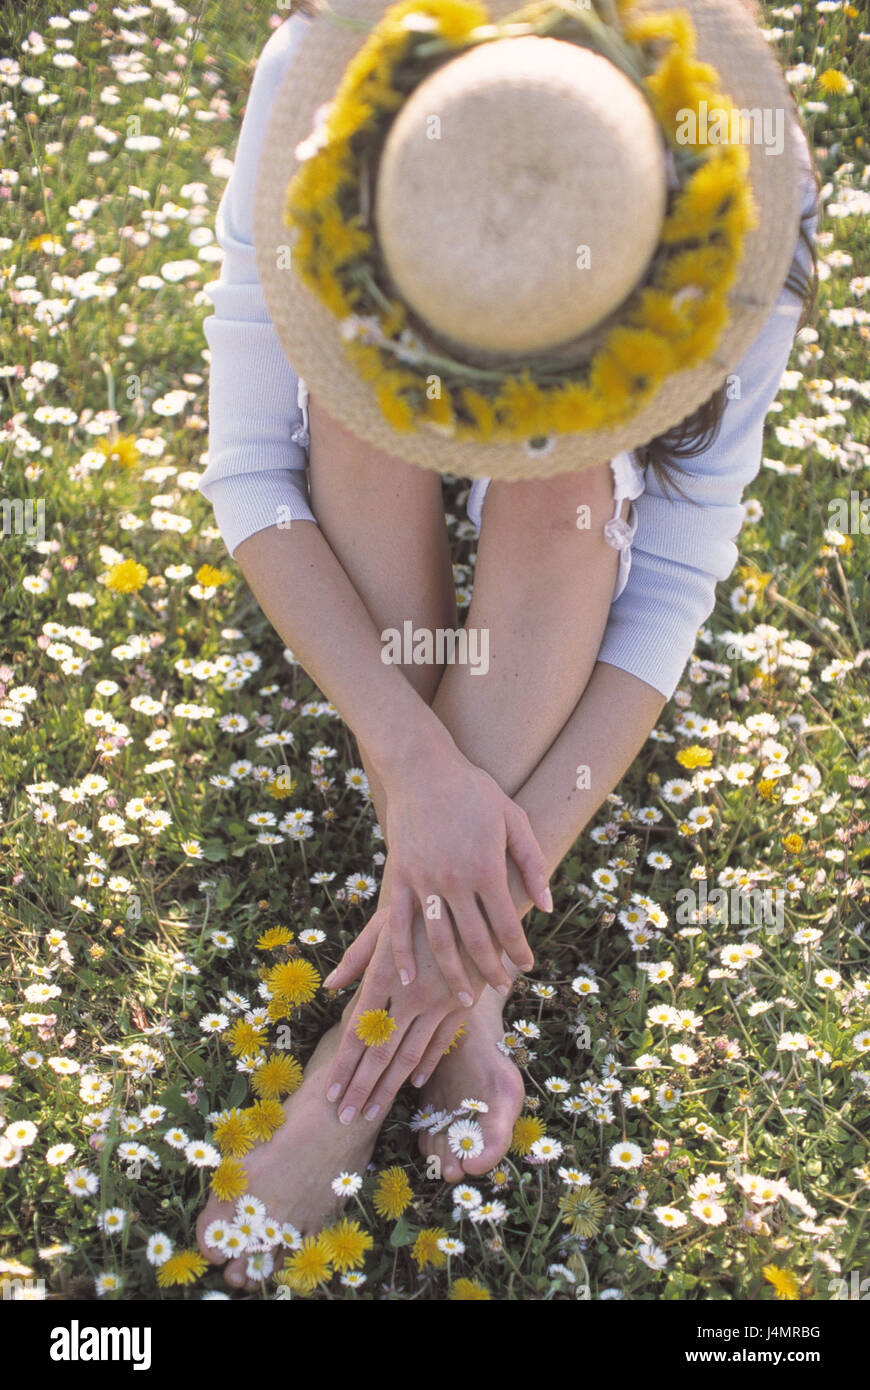 Spring, woman, straw hat, head, lowered, flower meadow, sit spring meadow, single, 30 years, détente, rest, rest, rest, take it easy, nature, leisure time, vacation, enjoy Stock Photo